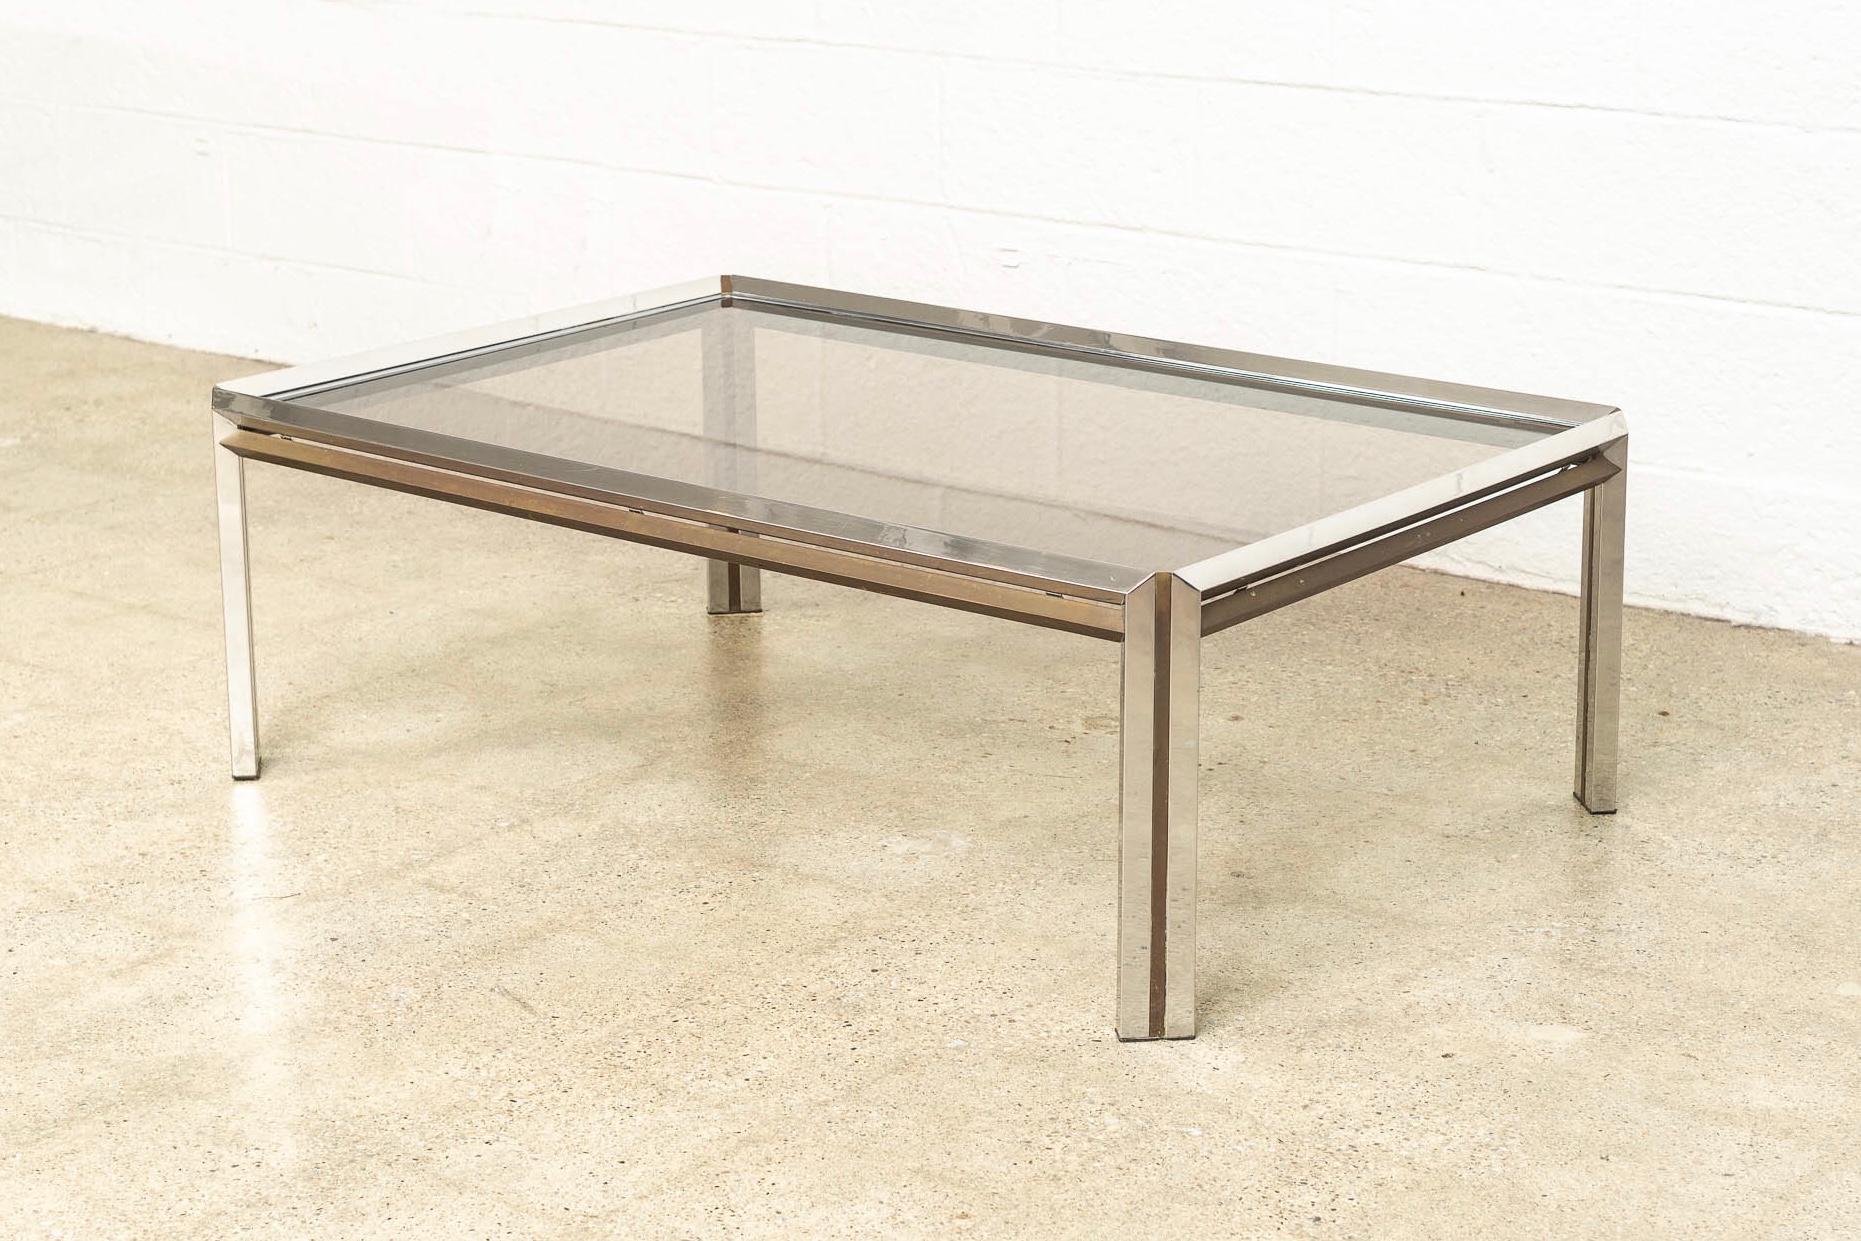 This vintage Mid-Century Modern chrome, brass and glass rectangular coffee table in the style of Milo Baughman is circa 1970. The unique design features a faceted chrome frame accented by solid brass side bars and inlaid brass striped legs. The